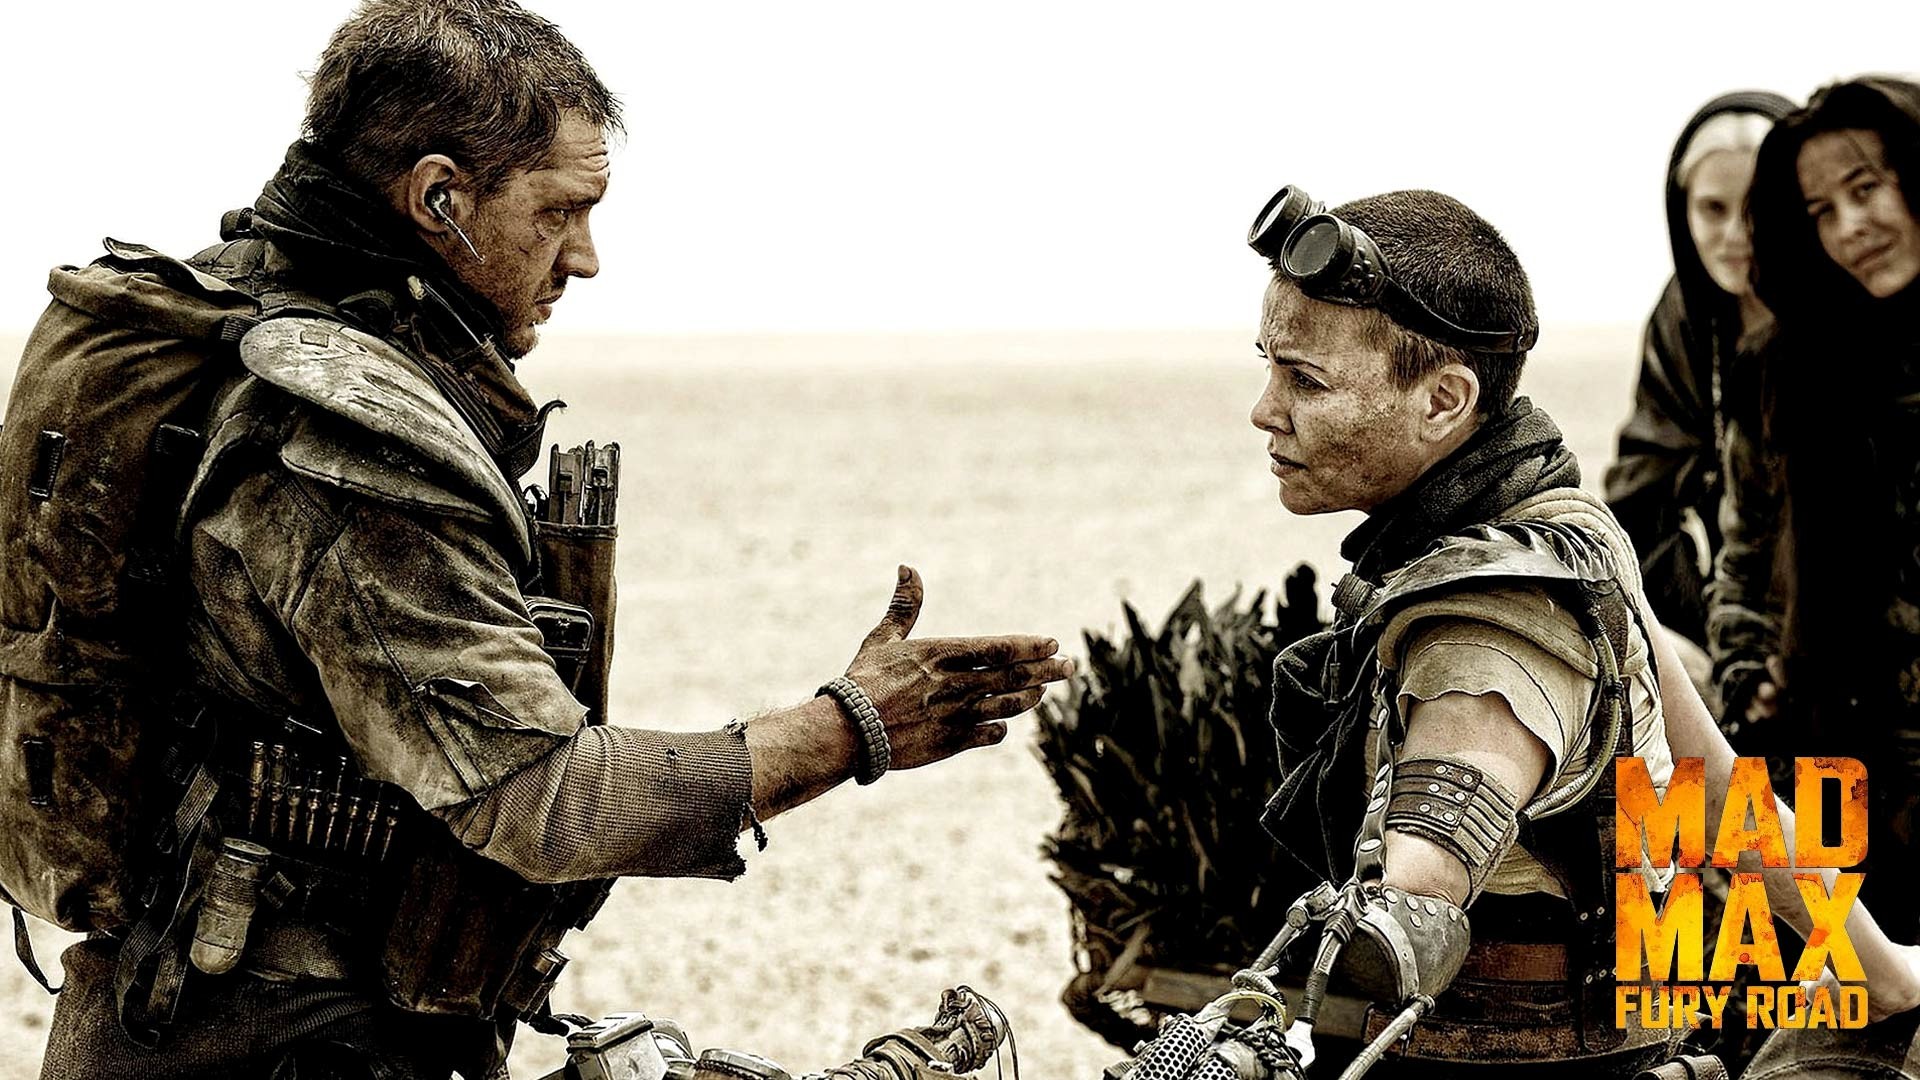 General 1920x1080 Mad Max movies Mad Max: Fury Road Tom Hardy Charlize Theron actor actress British South African George Miller